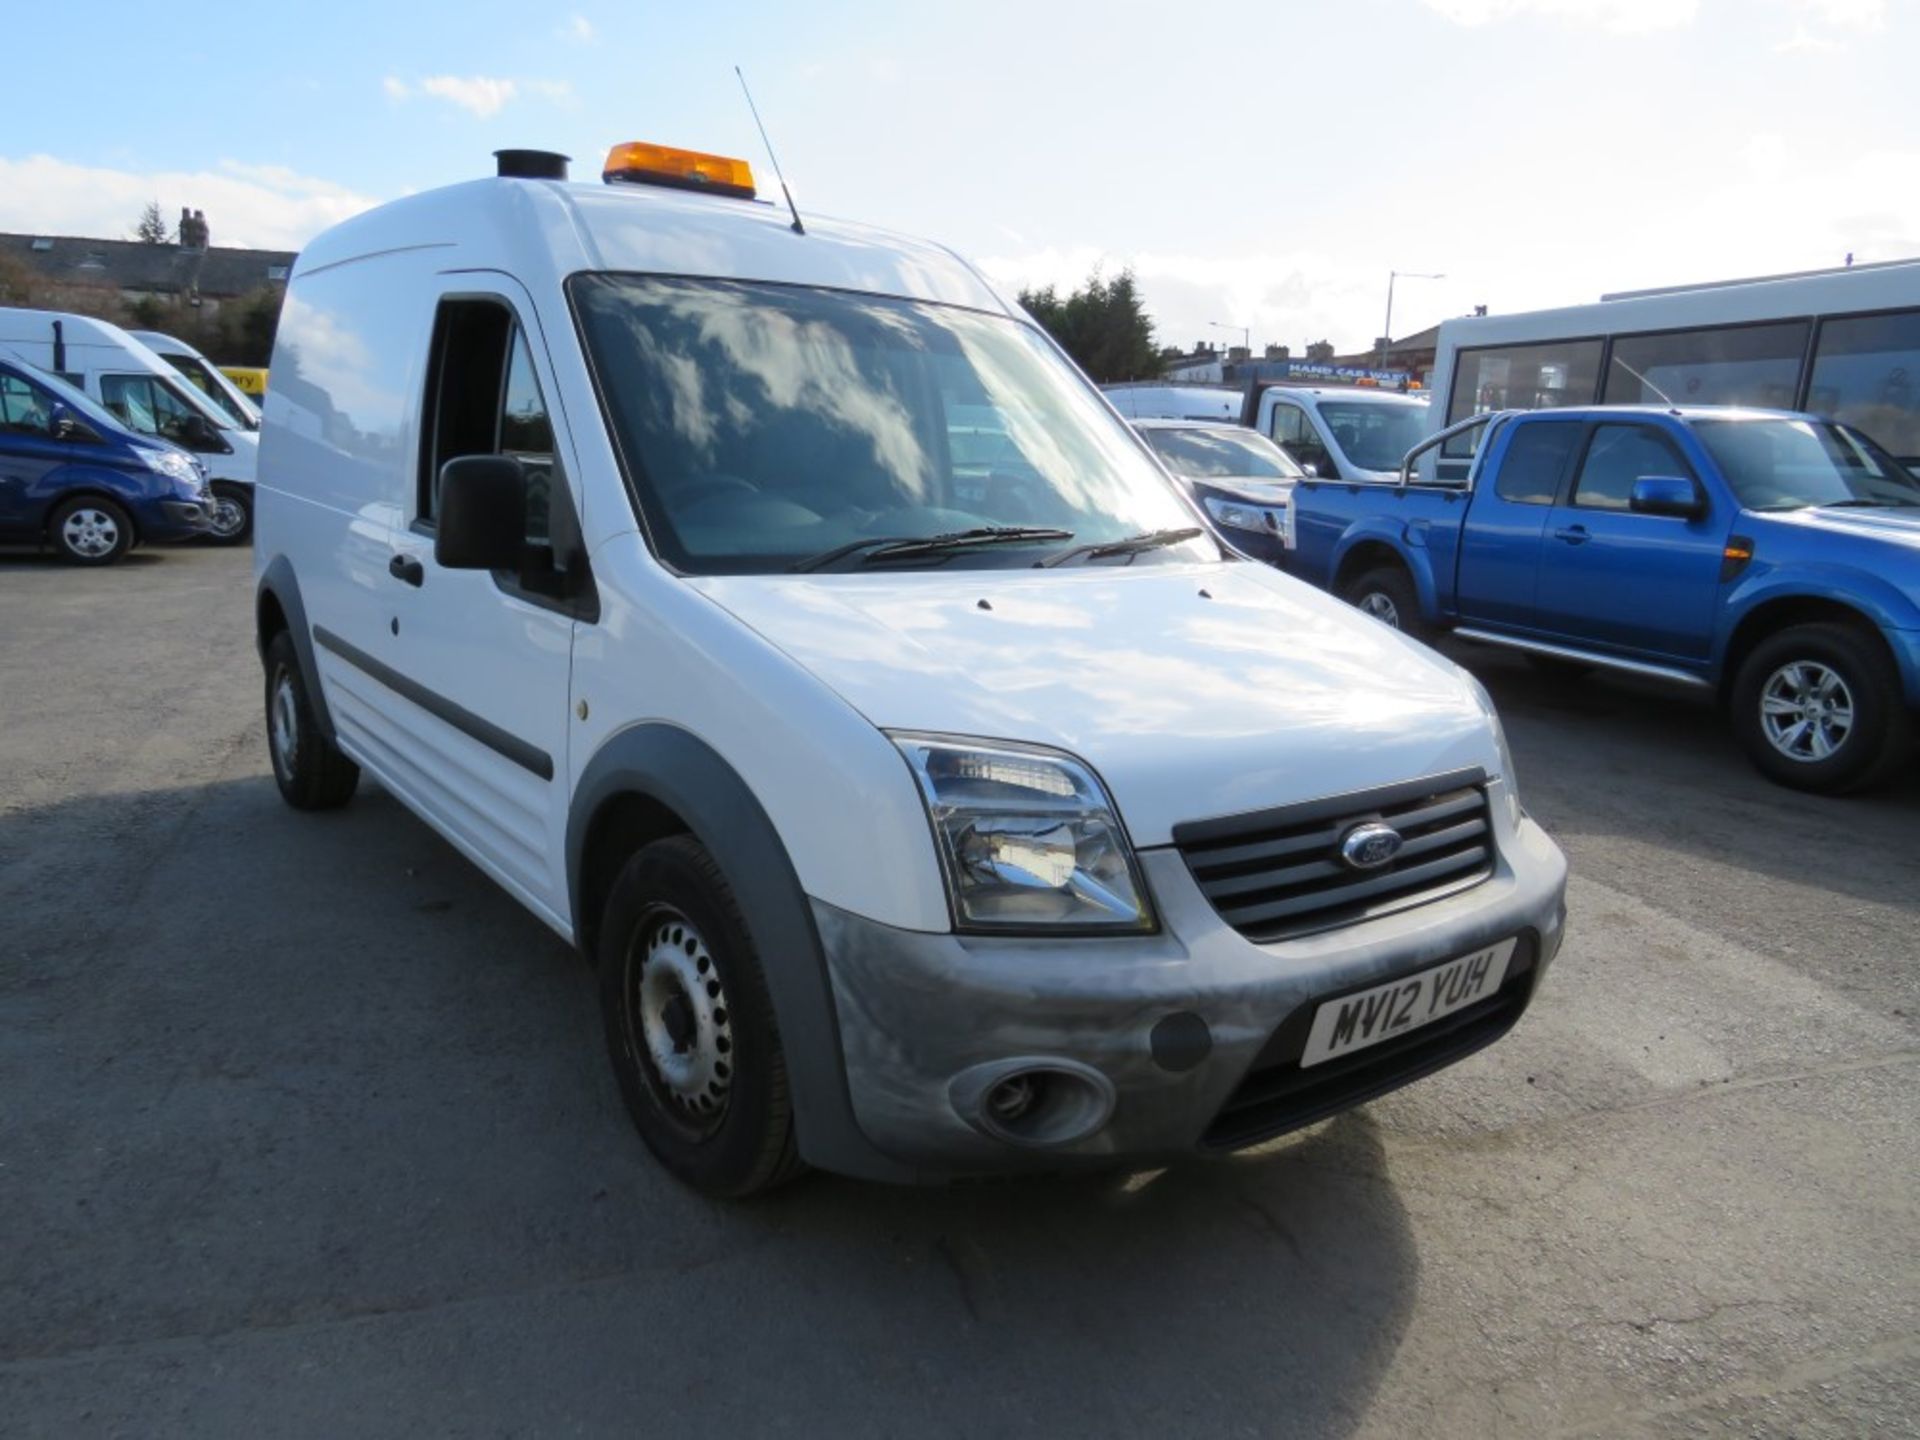 12 reg FORD TRANSIT CONNECT 90 T230 (DIRECT COUNCIL) 1ST REG 03/12, TEST 02/21, 30640M, V5 HERE, 1